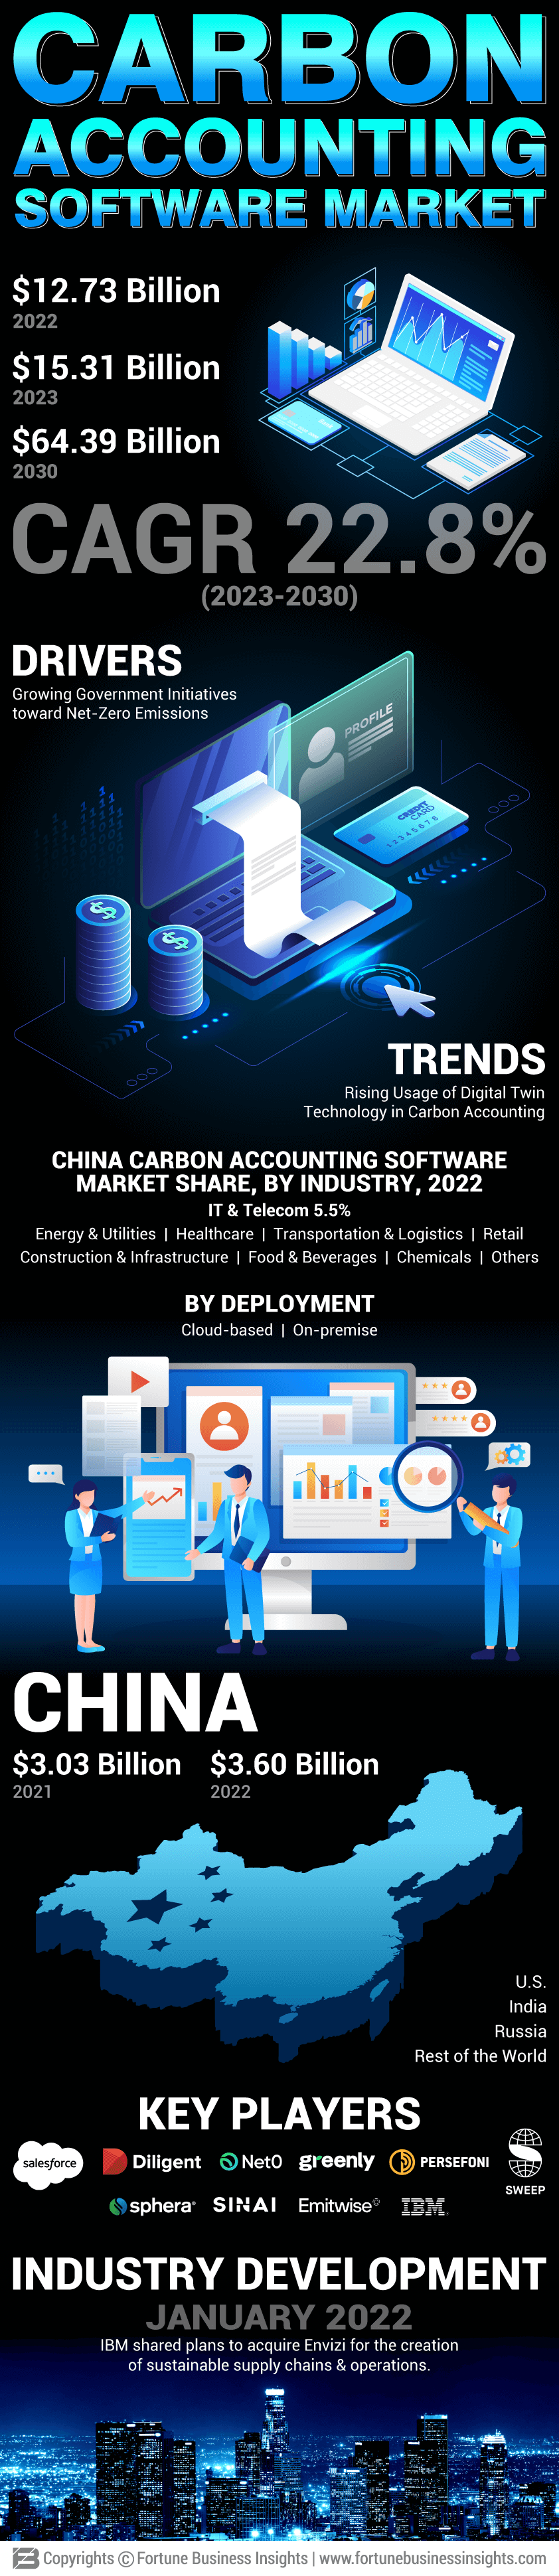 Carbon Accounting Software Market